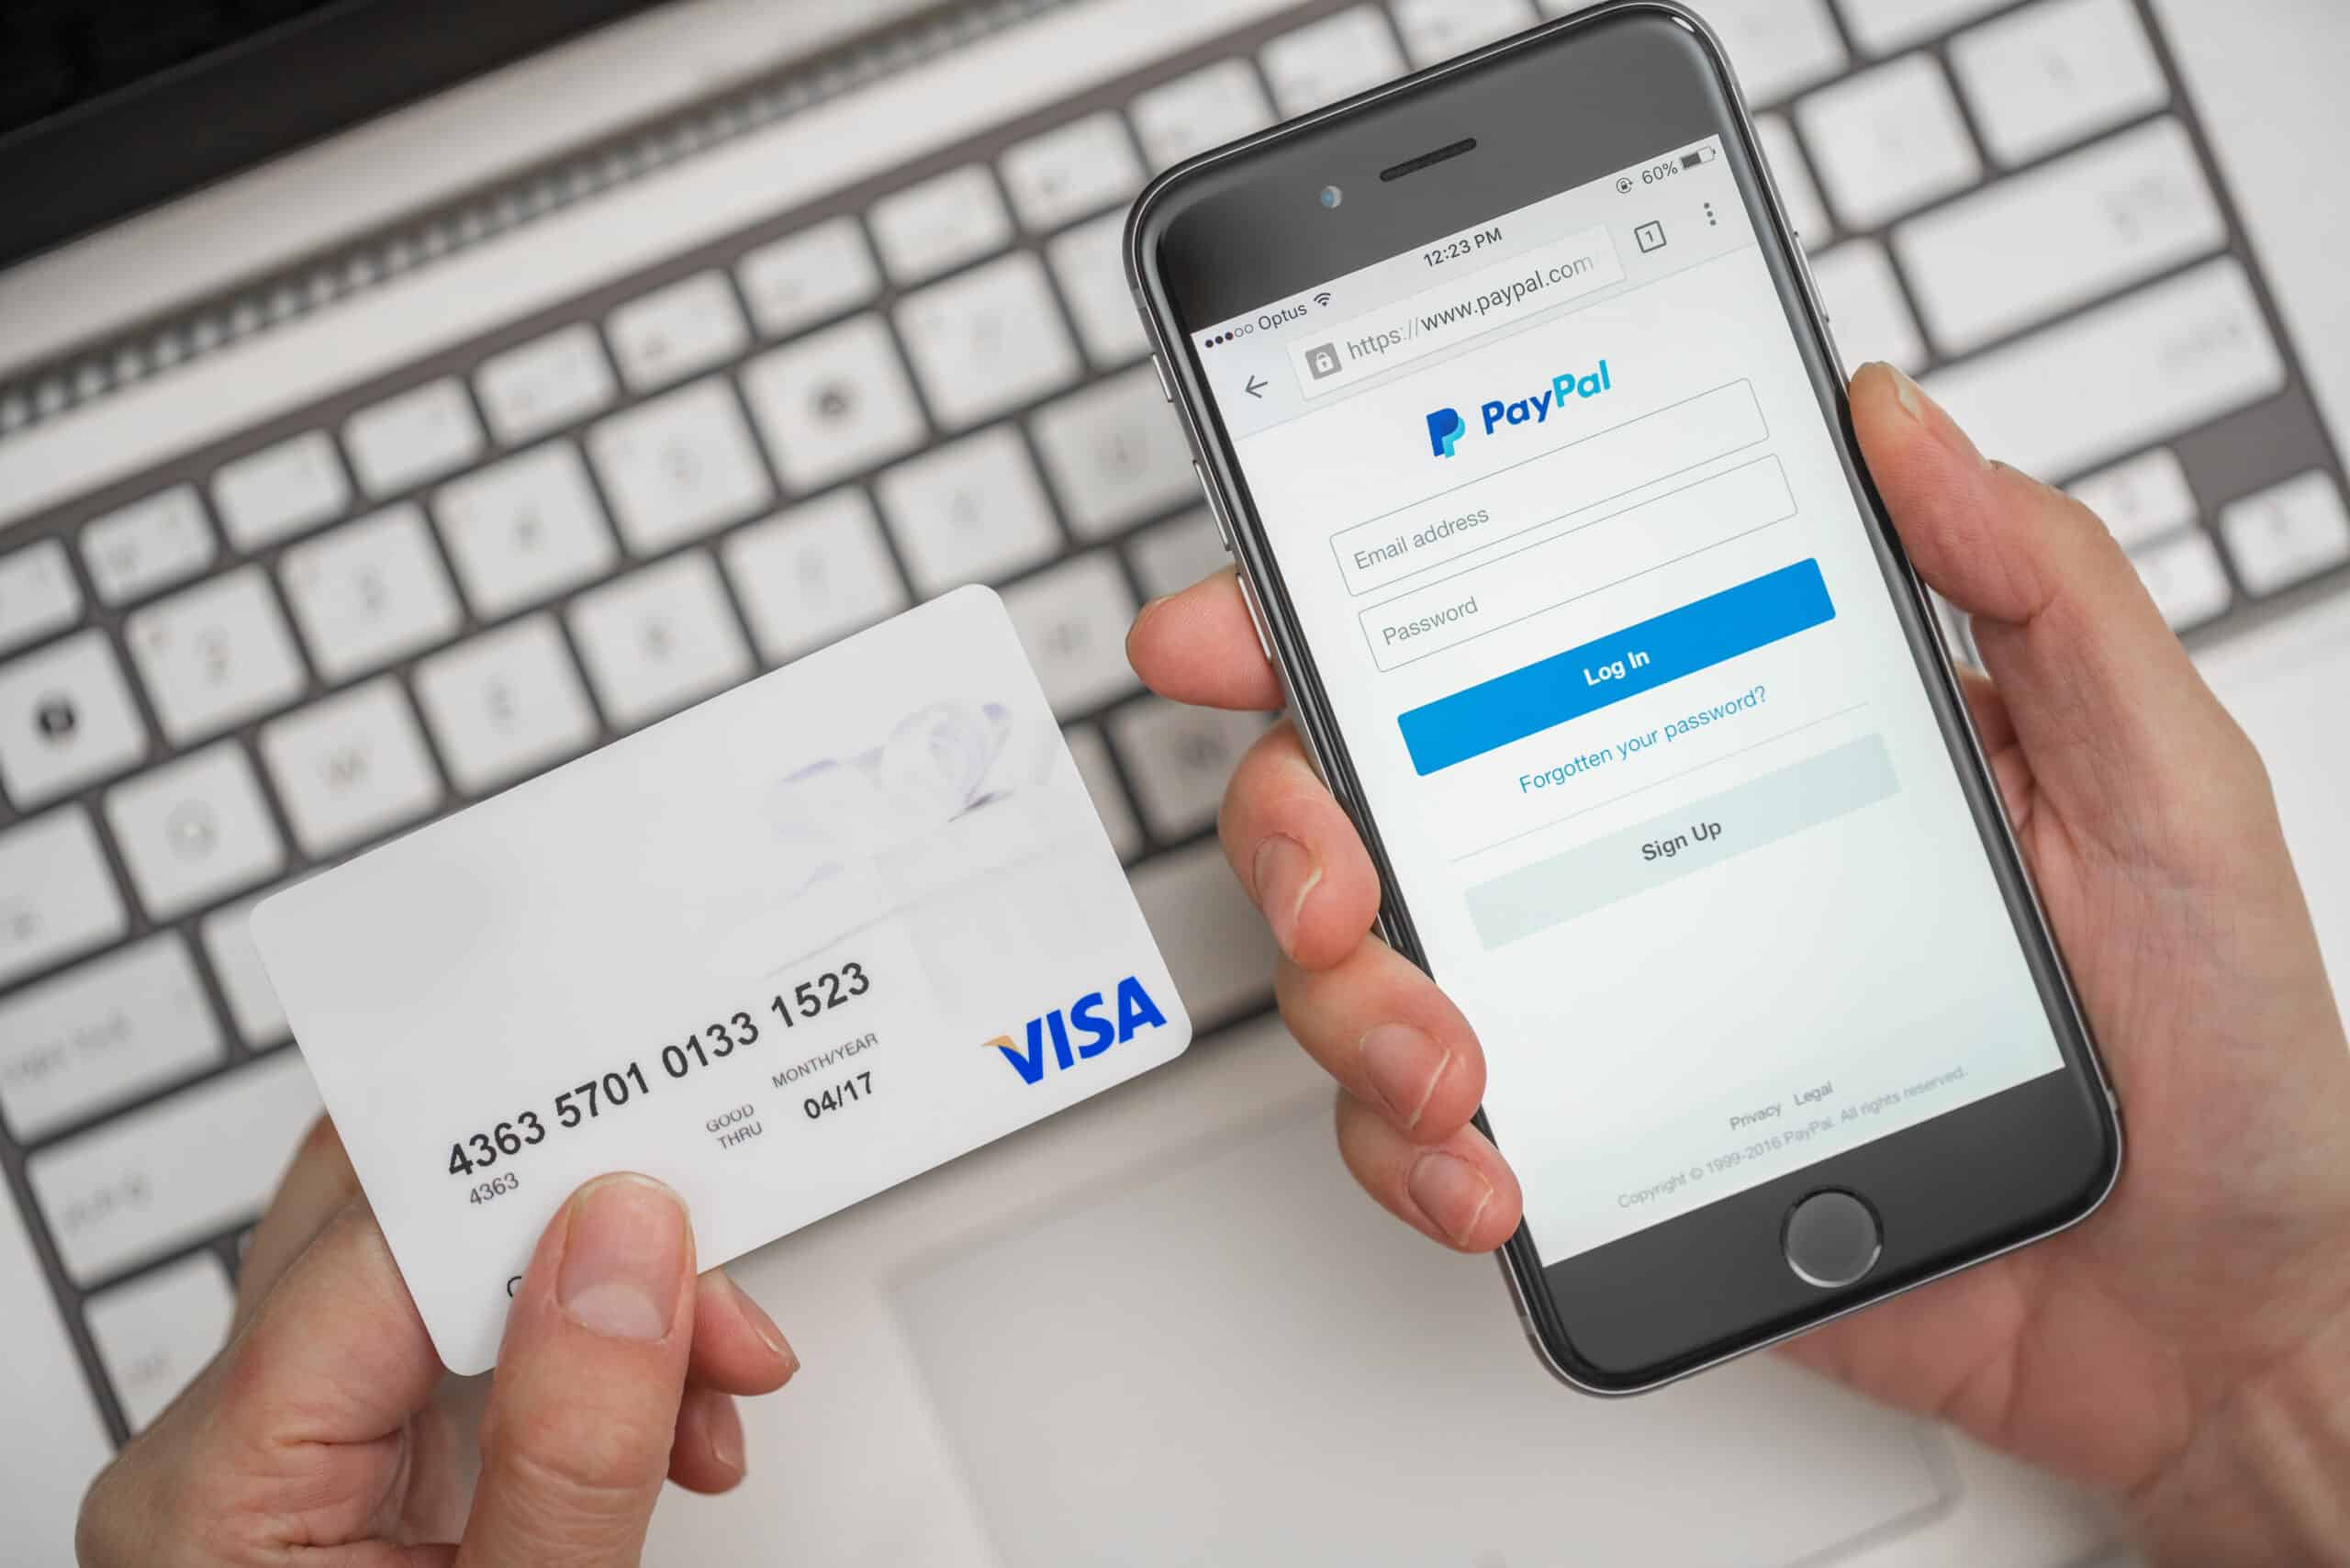 How To Use Paypal Credit On Amazon